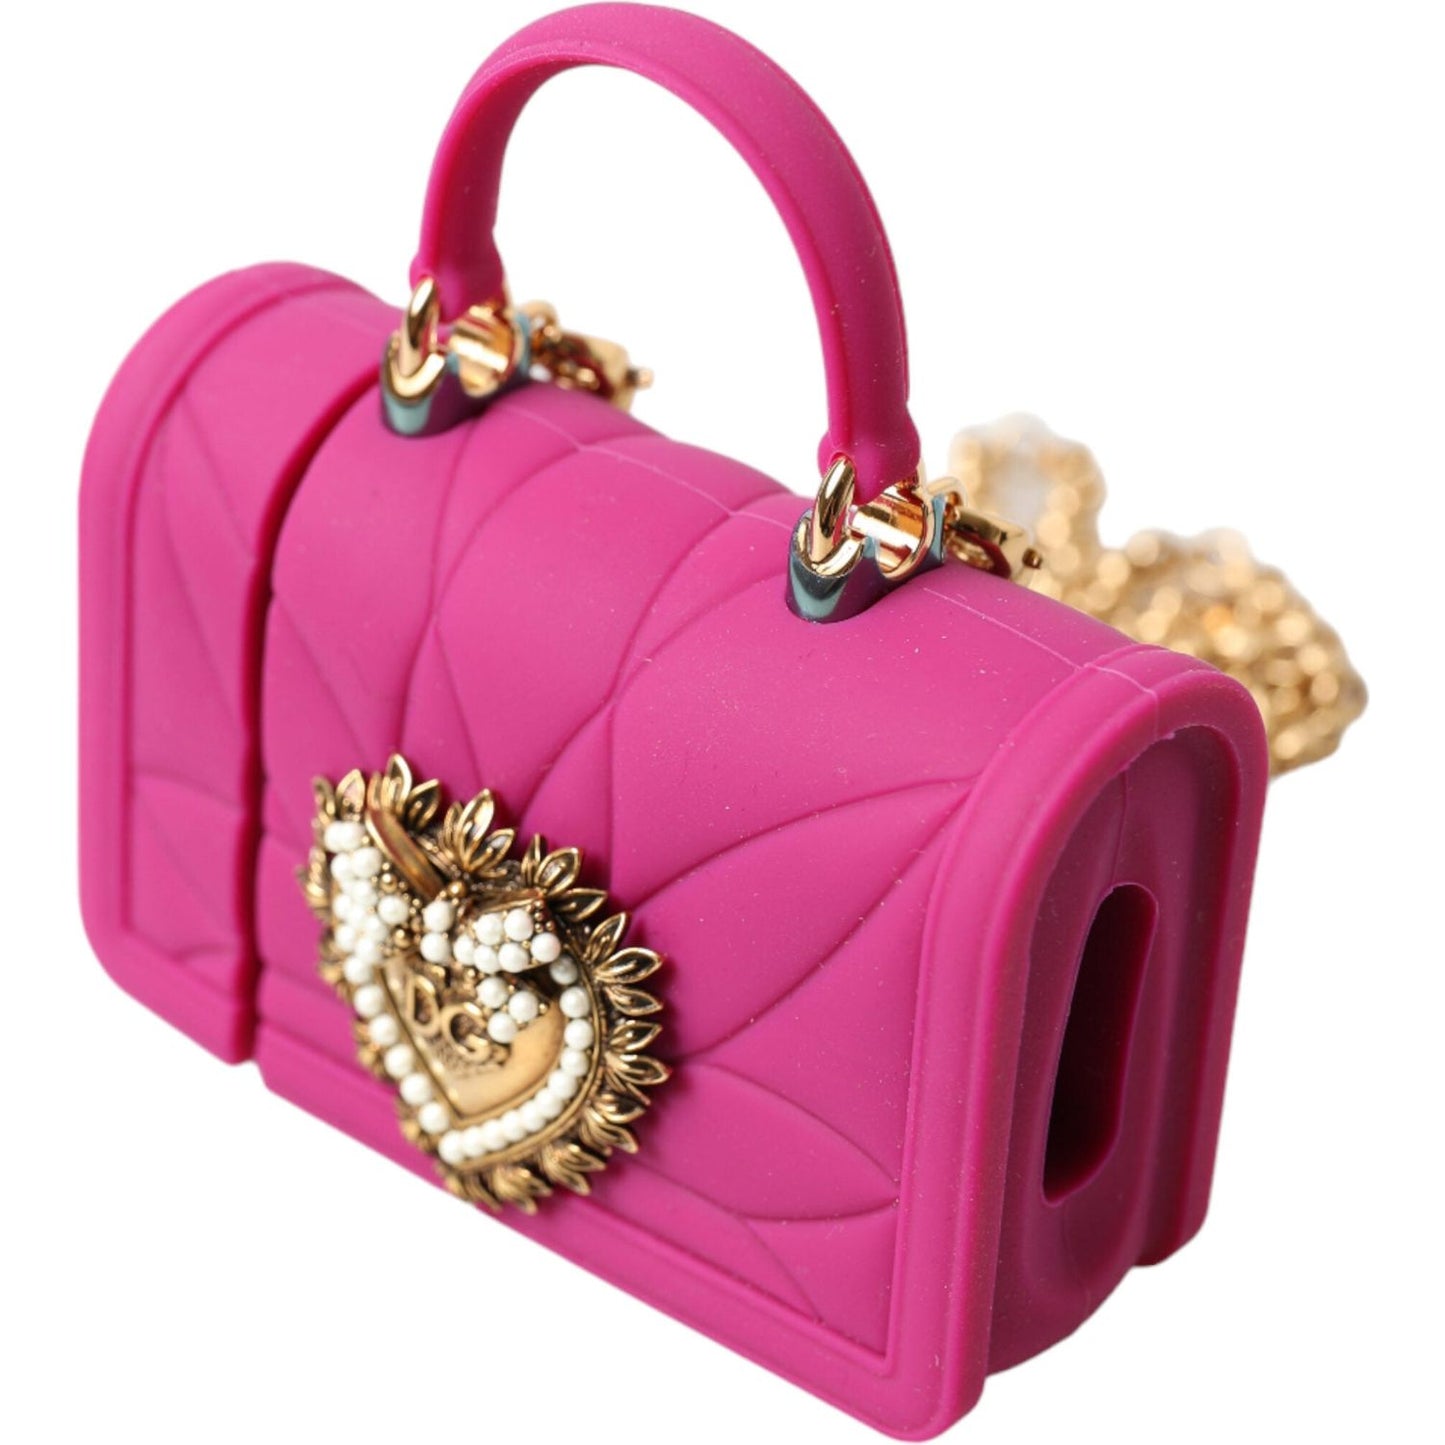 Dolce & Gabbana Chic Quilted Silicone Airpods Case - Pink & Gold pink-silicone-devotion-heart-bag-gold-chain-airpods-case 465A6728-BG-scaled-3f90f738-996.jpg